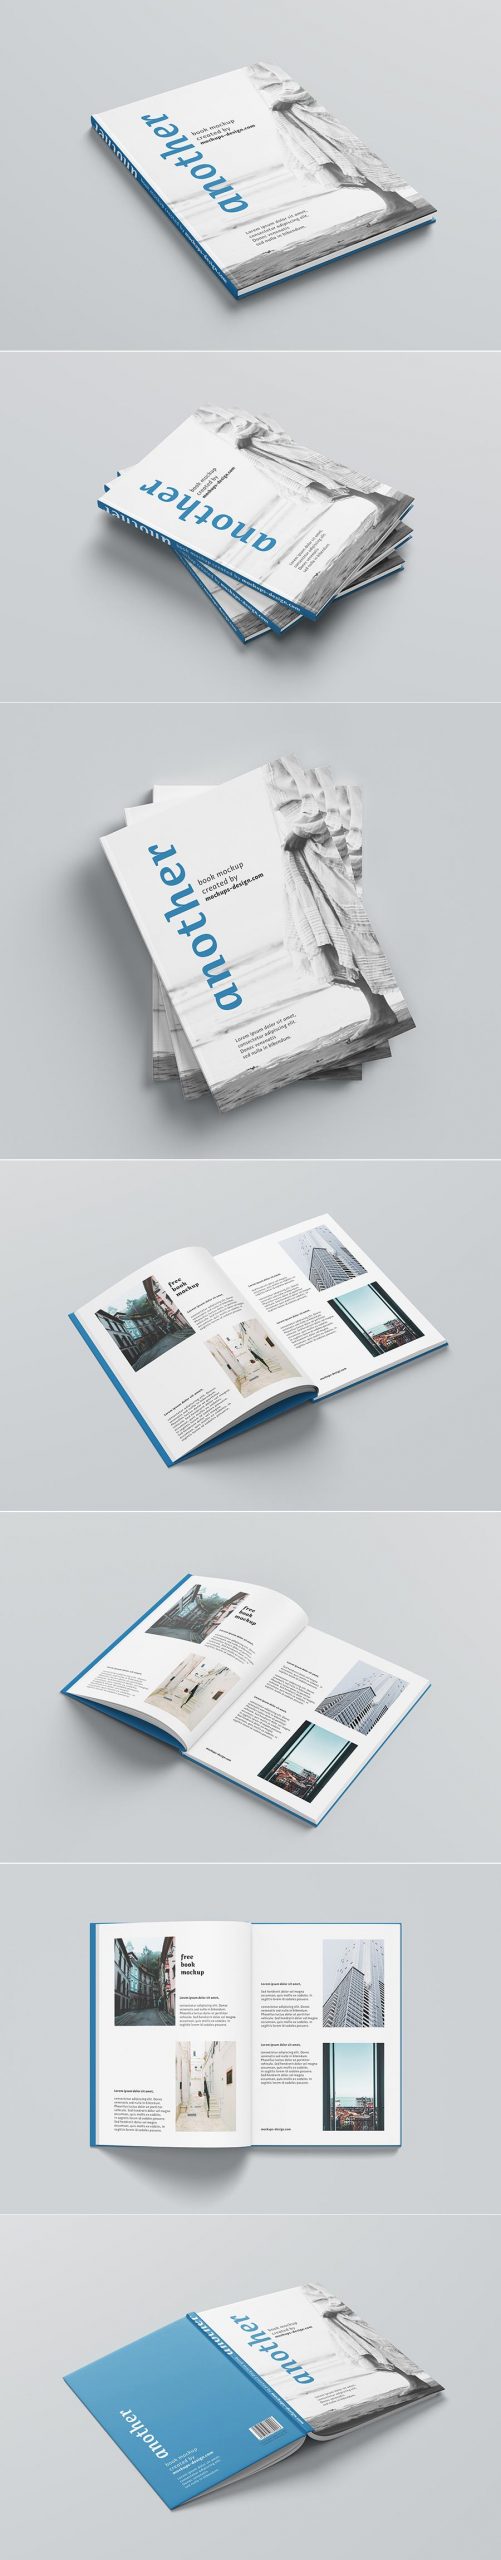 A4 Hardcover Book Mockup Free Download